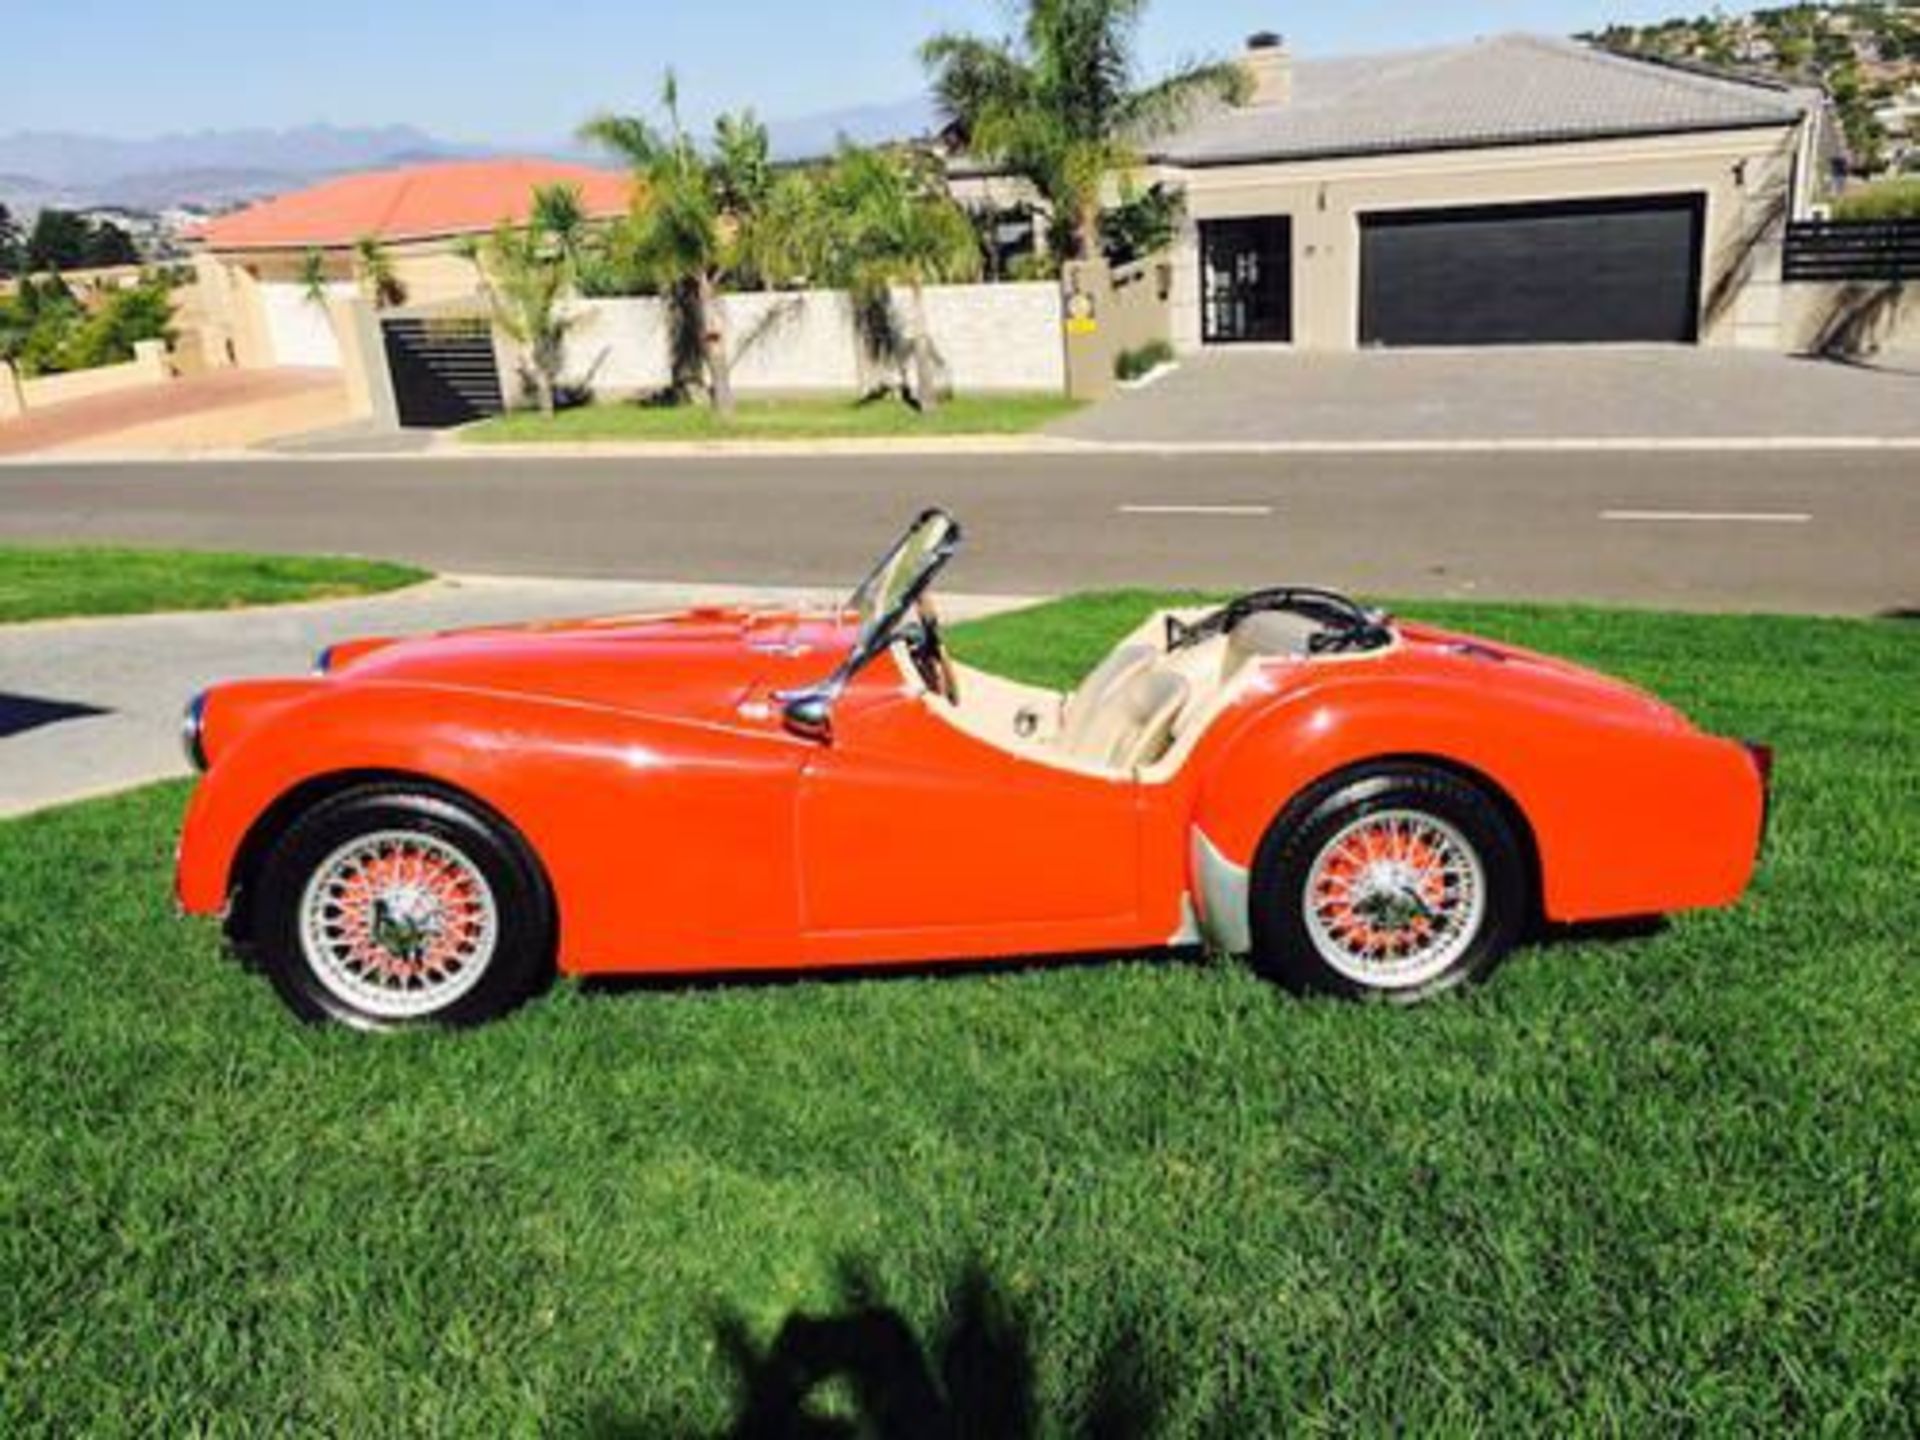 1954 Triumph TR2 Roadster Complete With Hard Top {053693} - Image 11 of 18